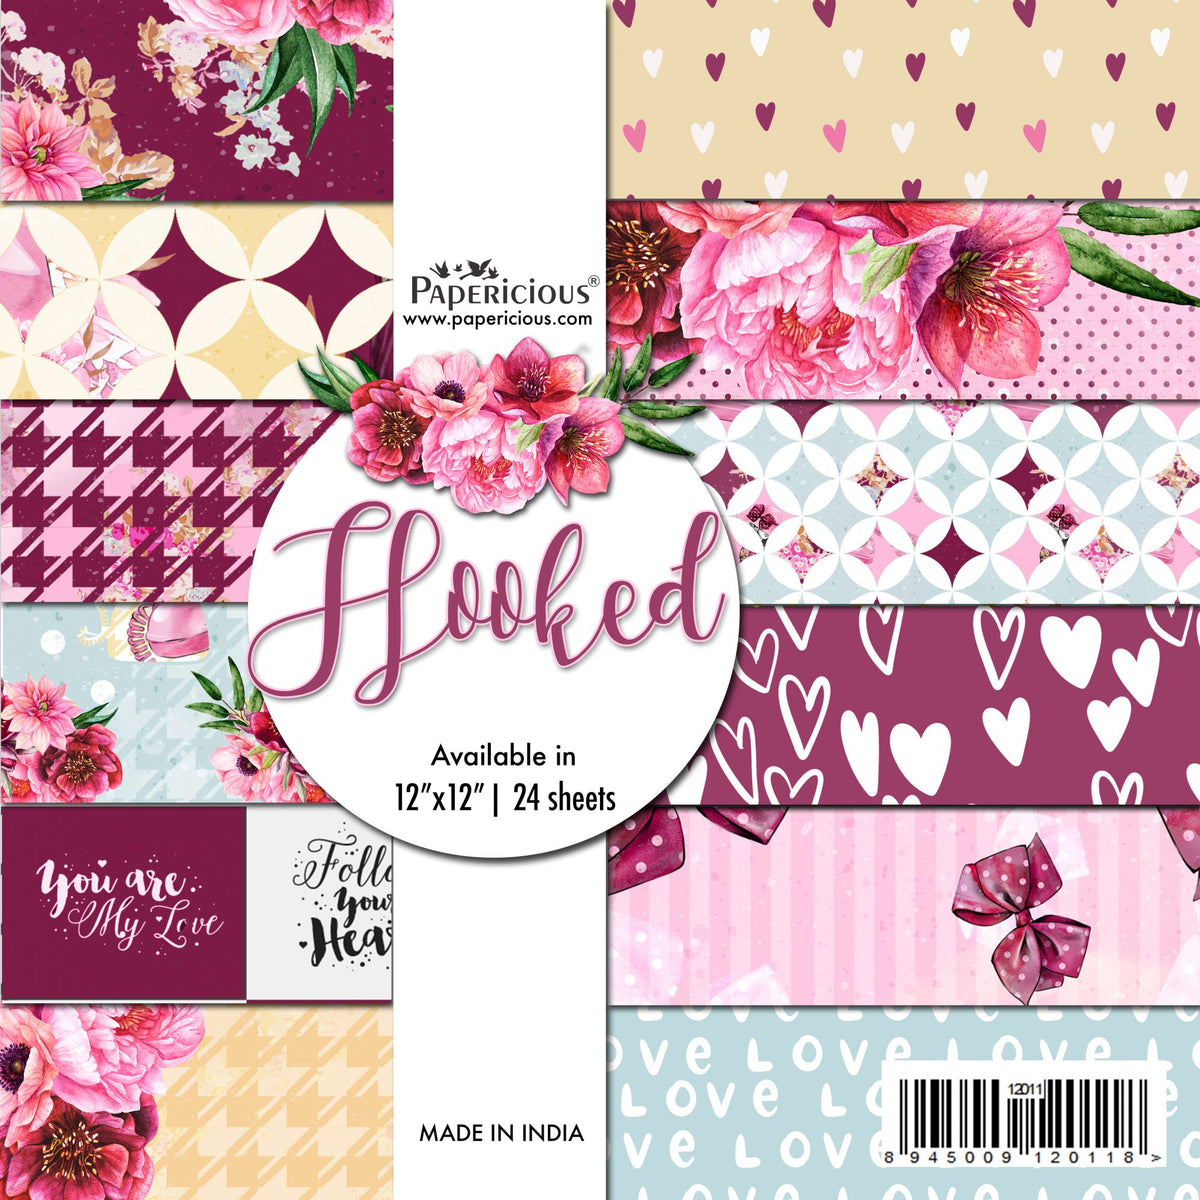 PAPERICIOUS - Hooked -  Designer Pattern Printed Scrapbook Papers / 24 sheets